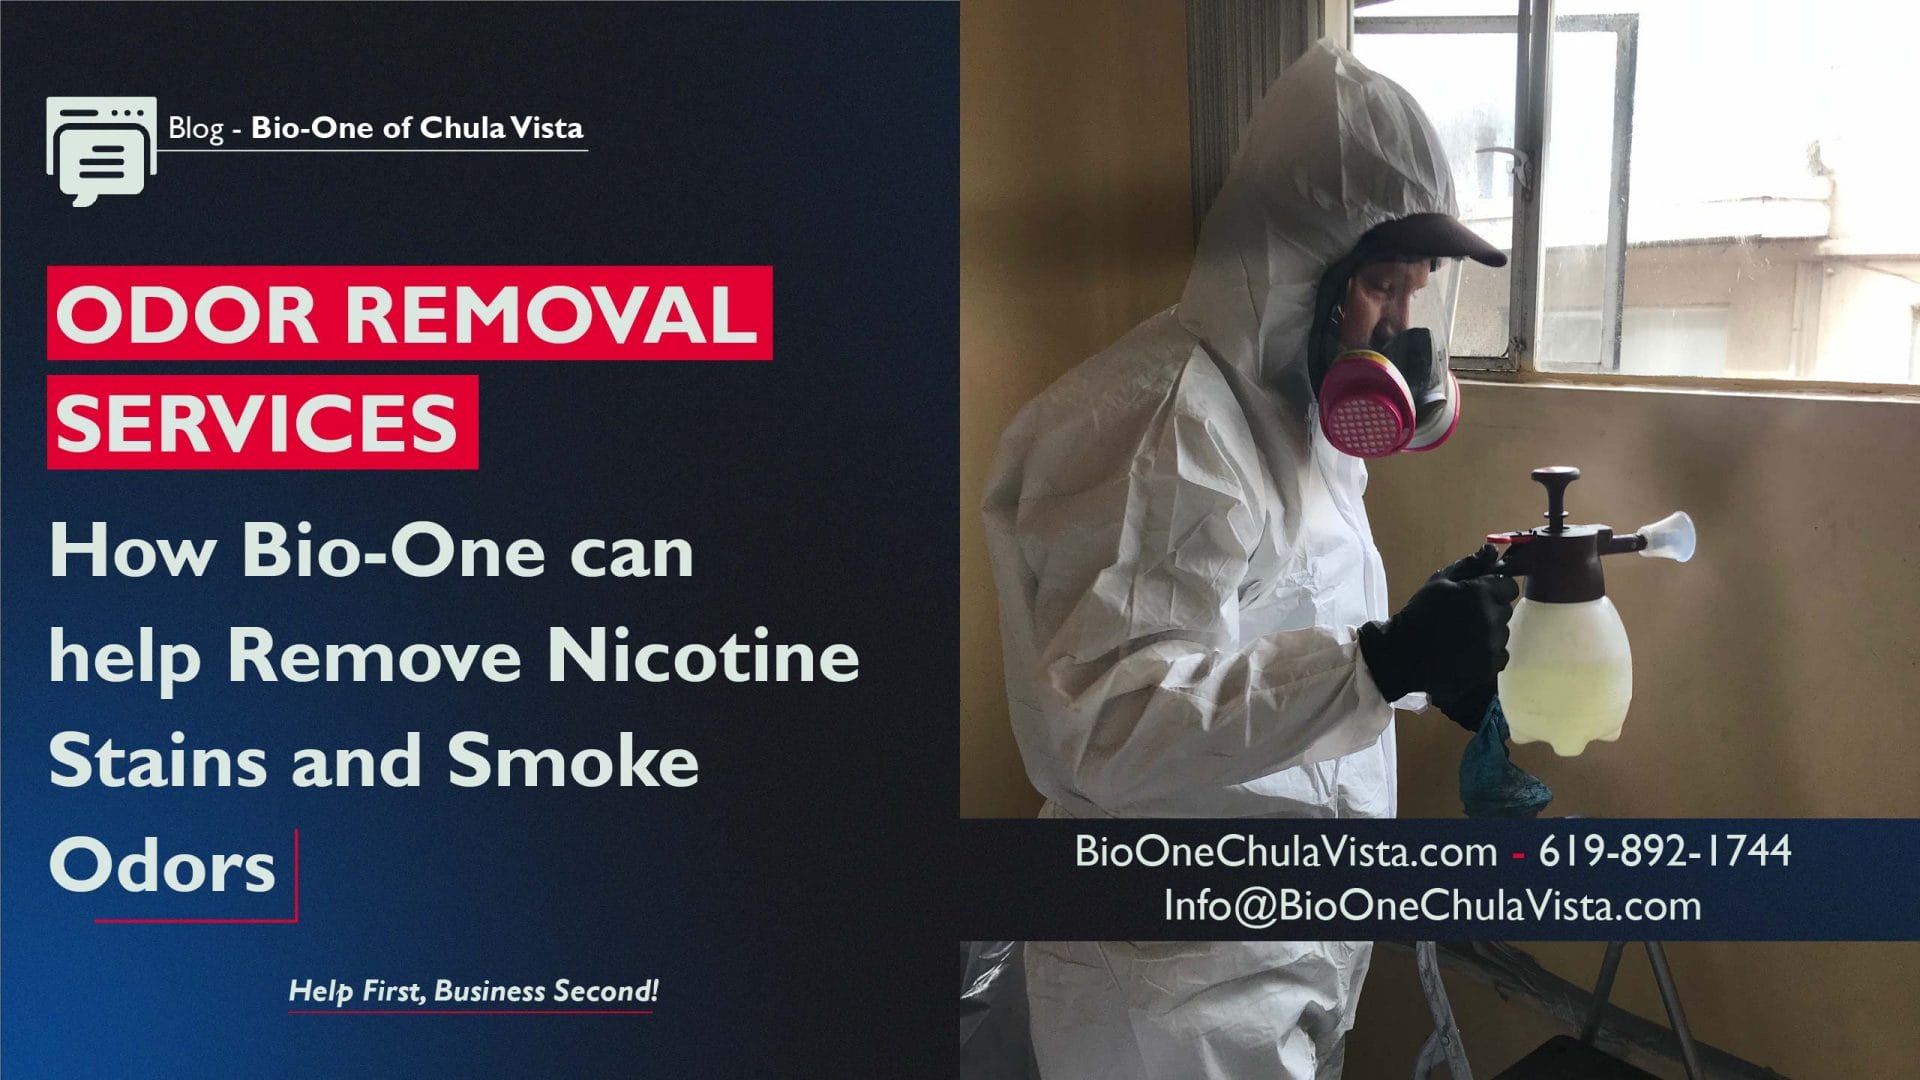 How Bio-One can help Remove Nicotine Stains and Smoke Odors